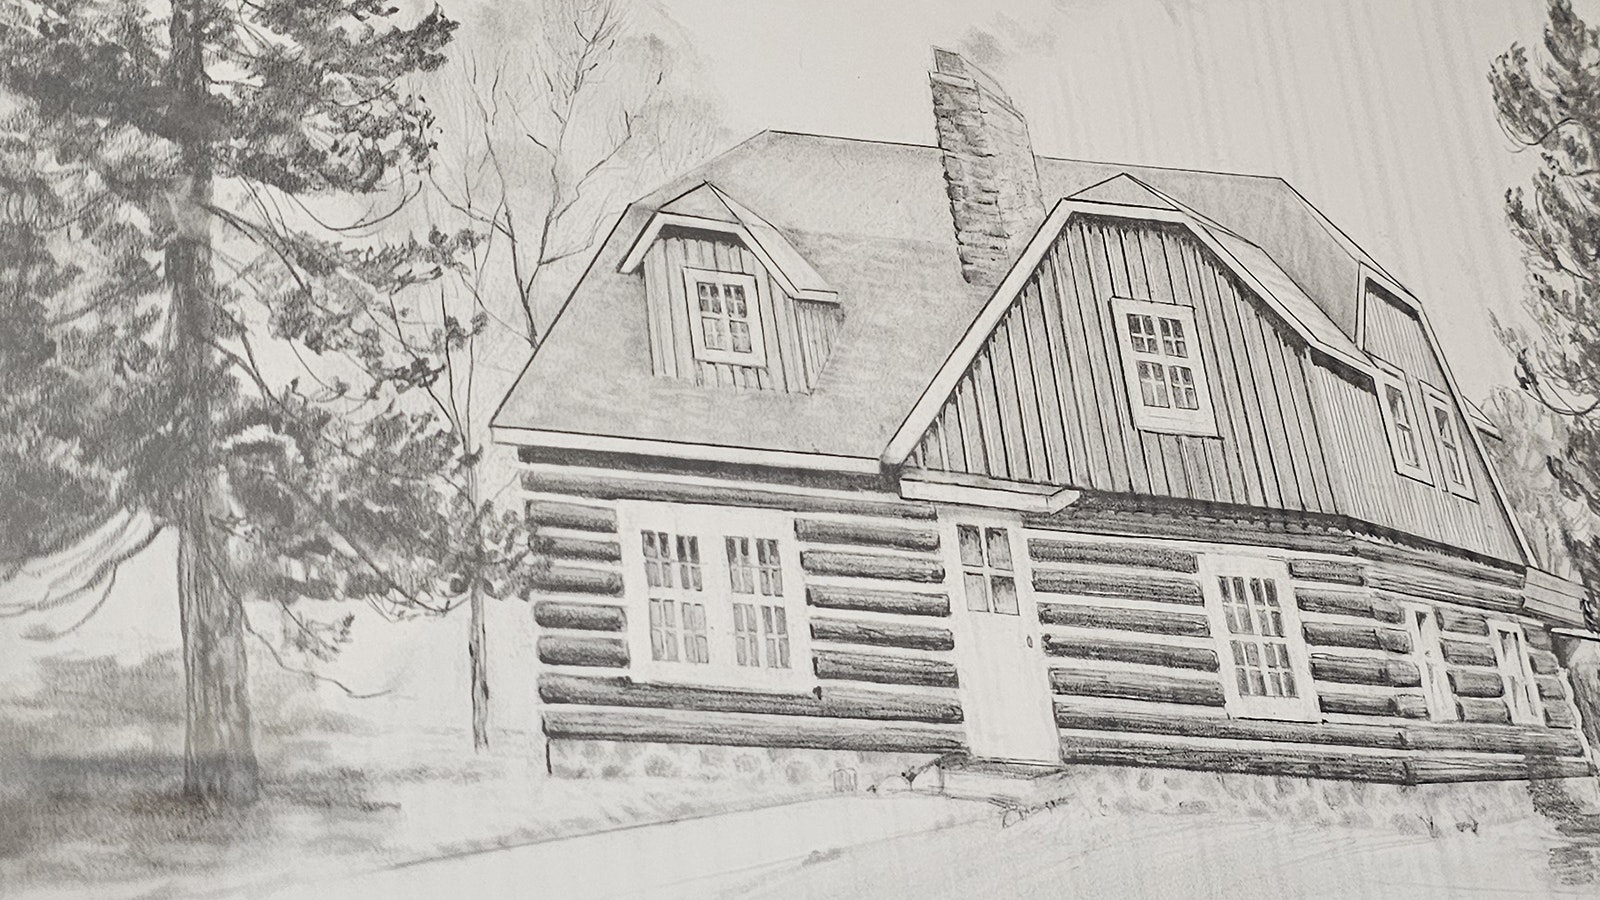 An artist's sketch of the Chambers House Bed and Breakfast.